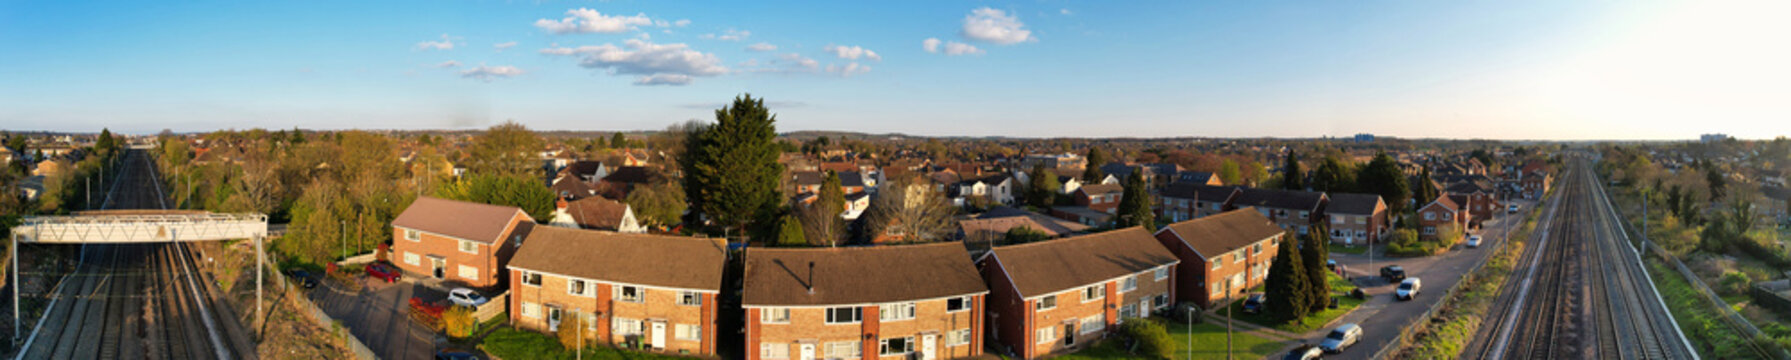 High Angle and Best Footage of Modern Housing and Residential District at Barton Road Luton Town of England. The Footage was Captured with Drone's Camera